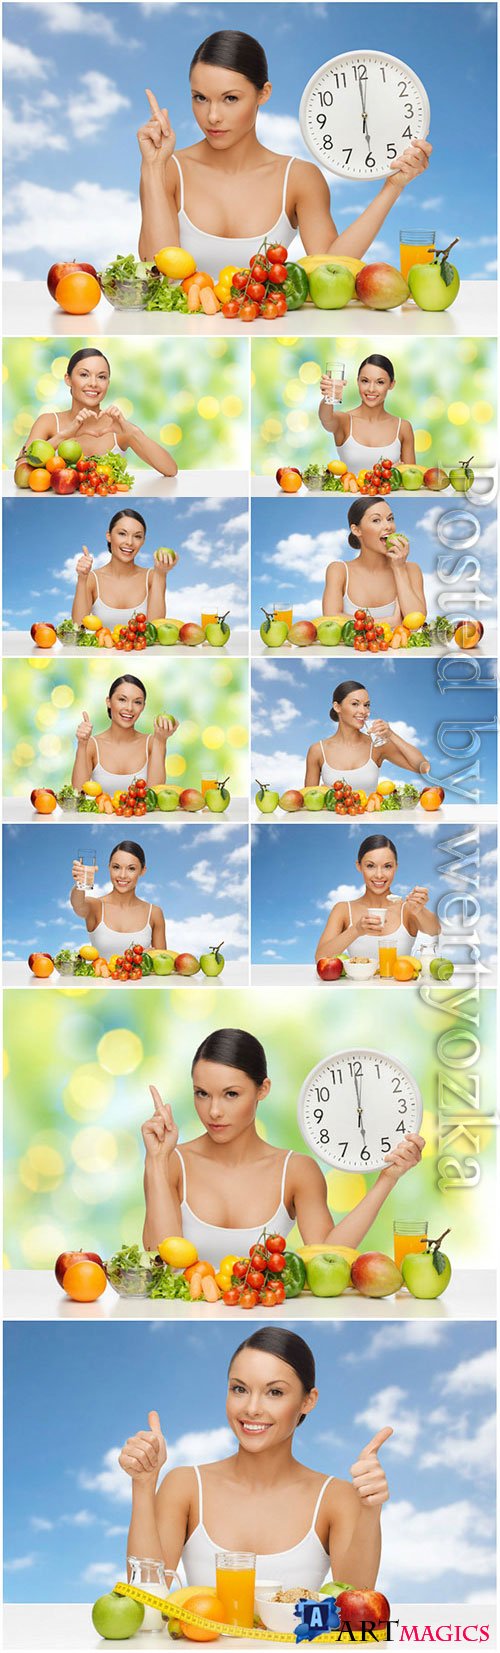 Healthy food concept, girl with fruits and vegetables stock photo